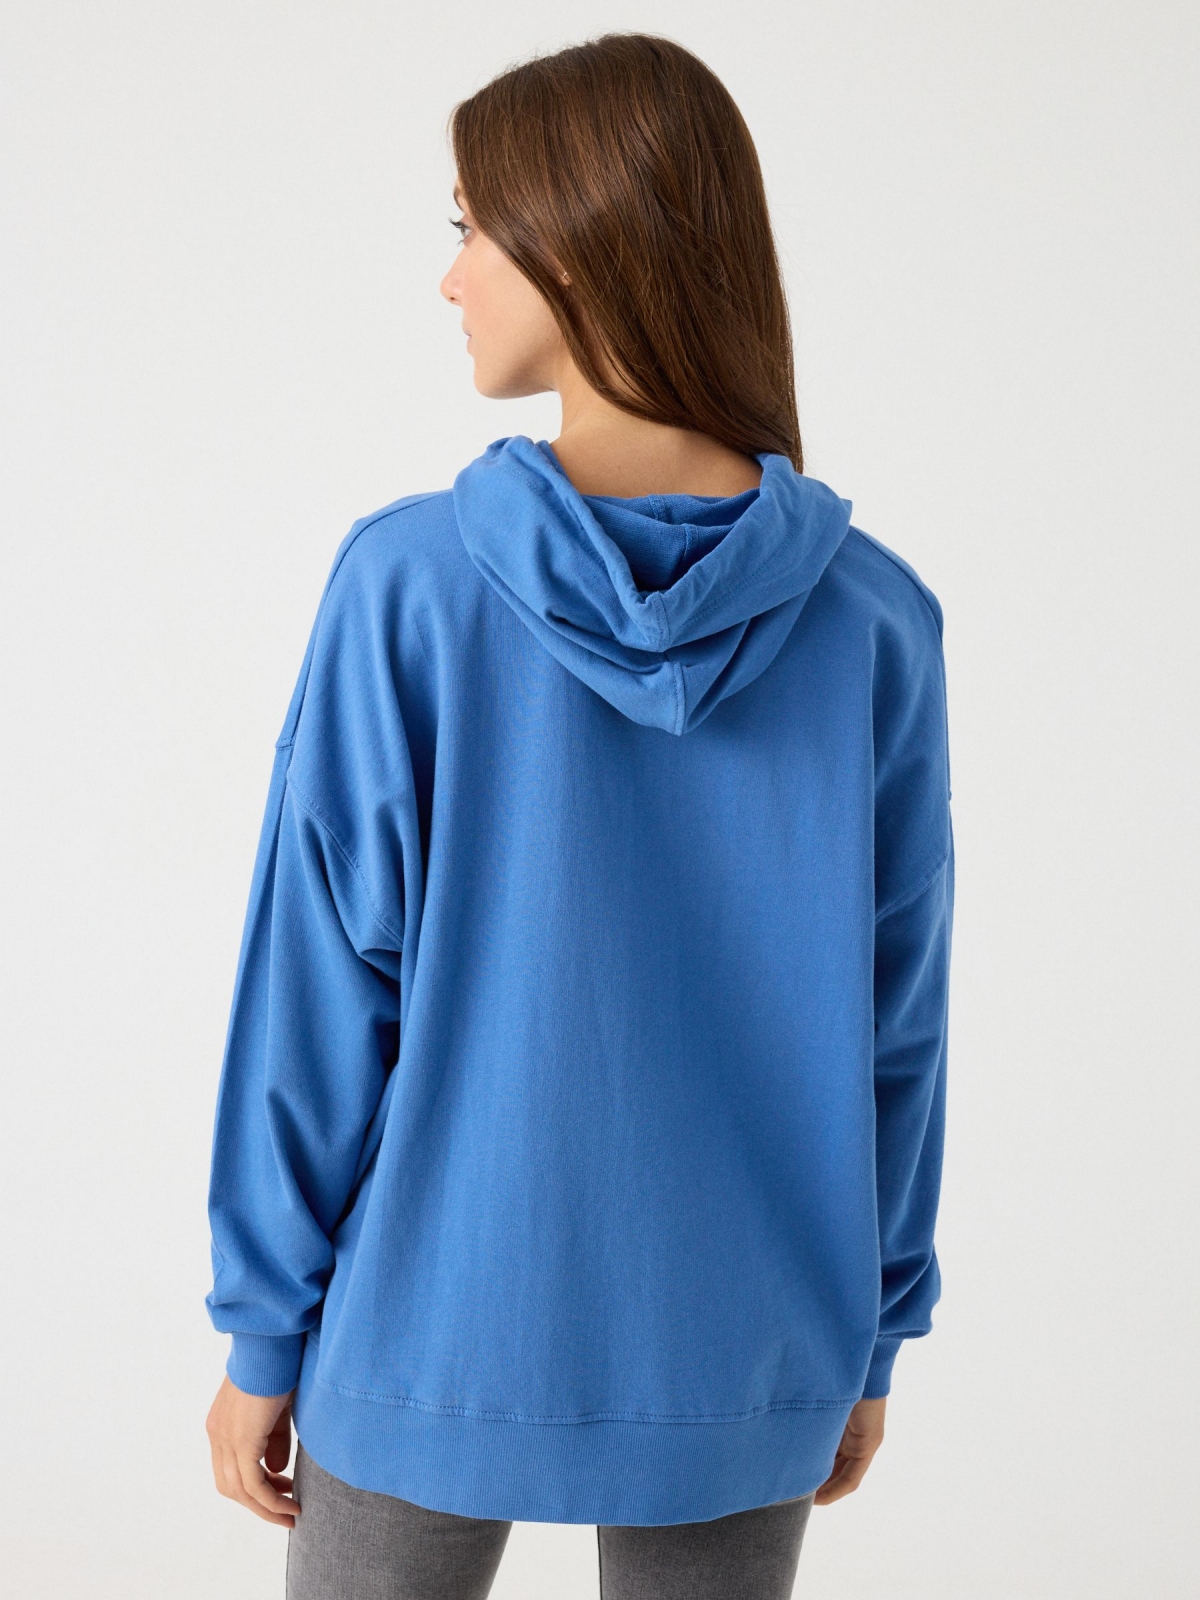 Basic hoodie blue middle back view